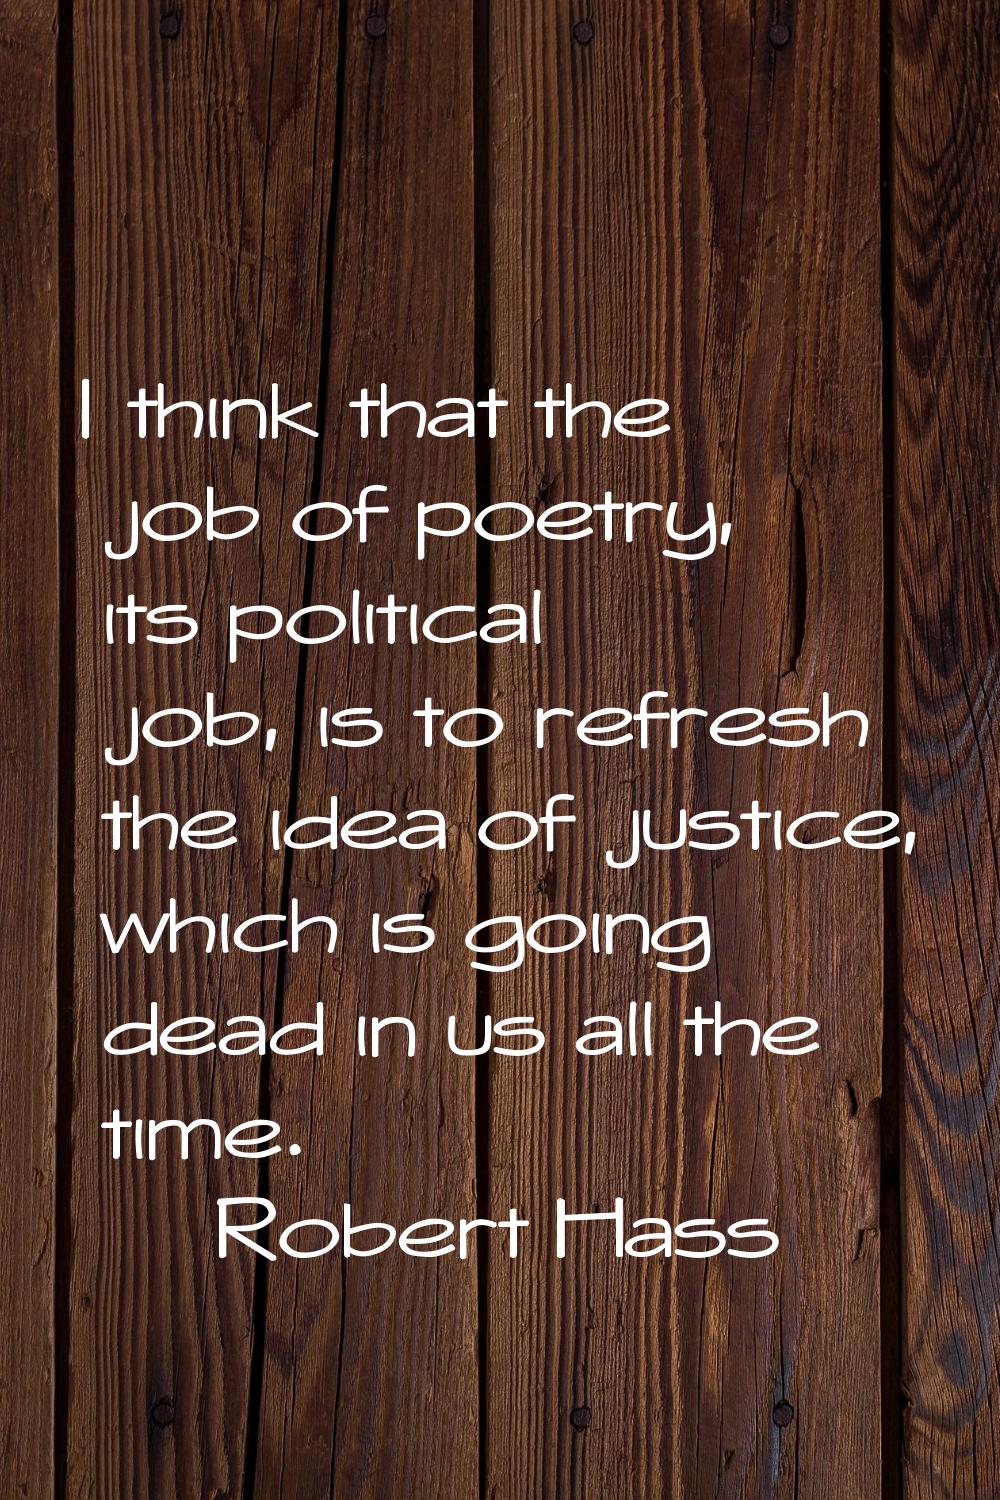 I think that the job of poetry, its political job, is to refresh the idea of justice, which is goin